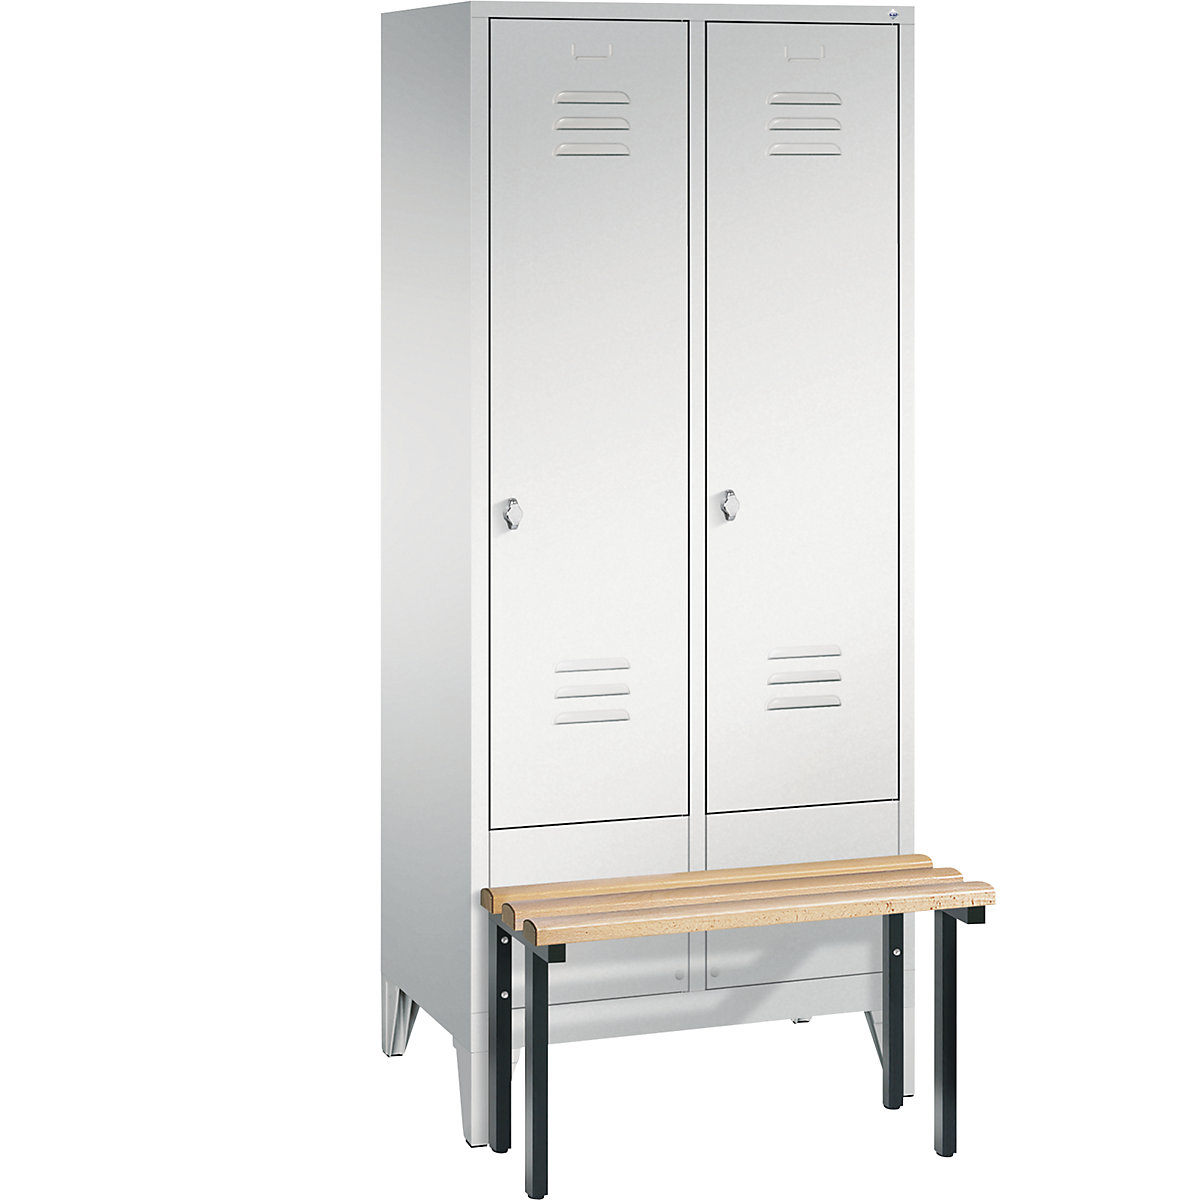 CLASSIC cloakroom locker with bench mounted in front – C+P, 2 compartments, compartment width 400 mm, light grey-4